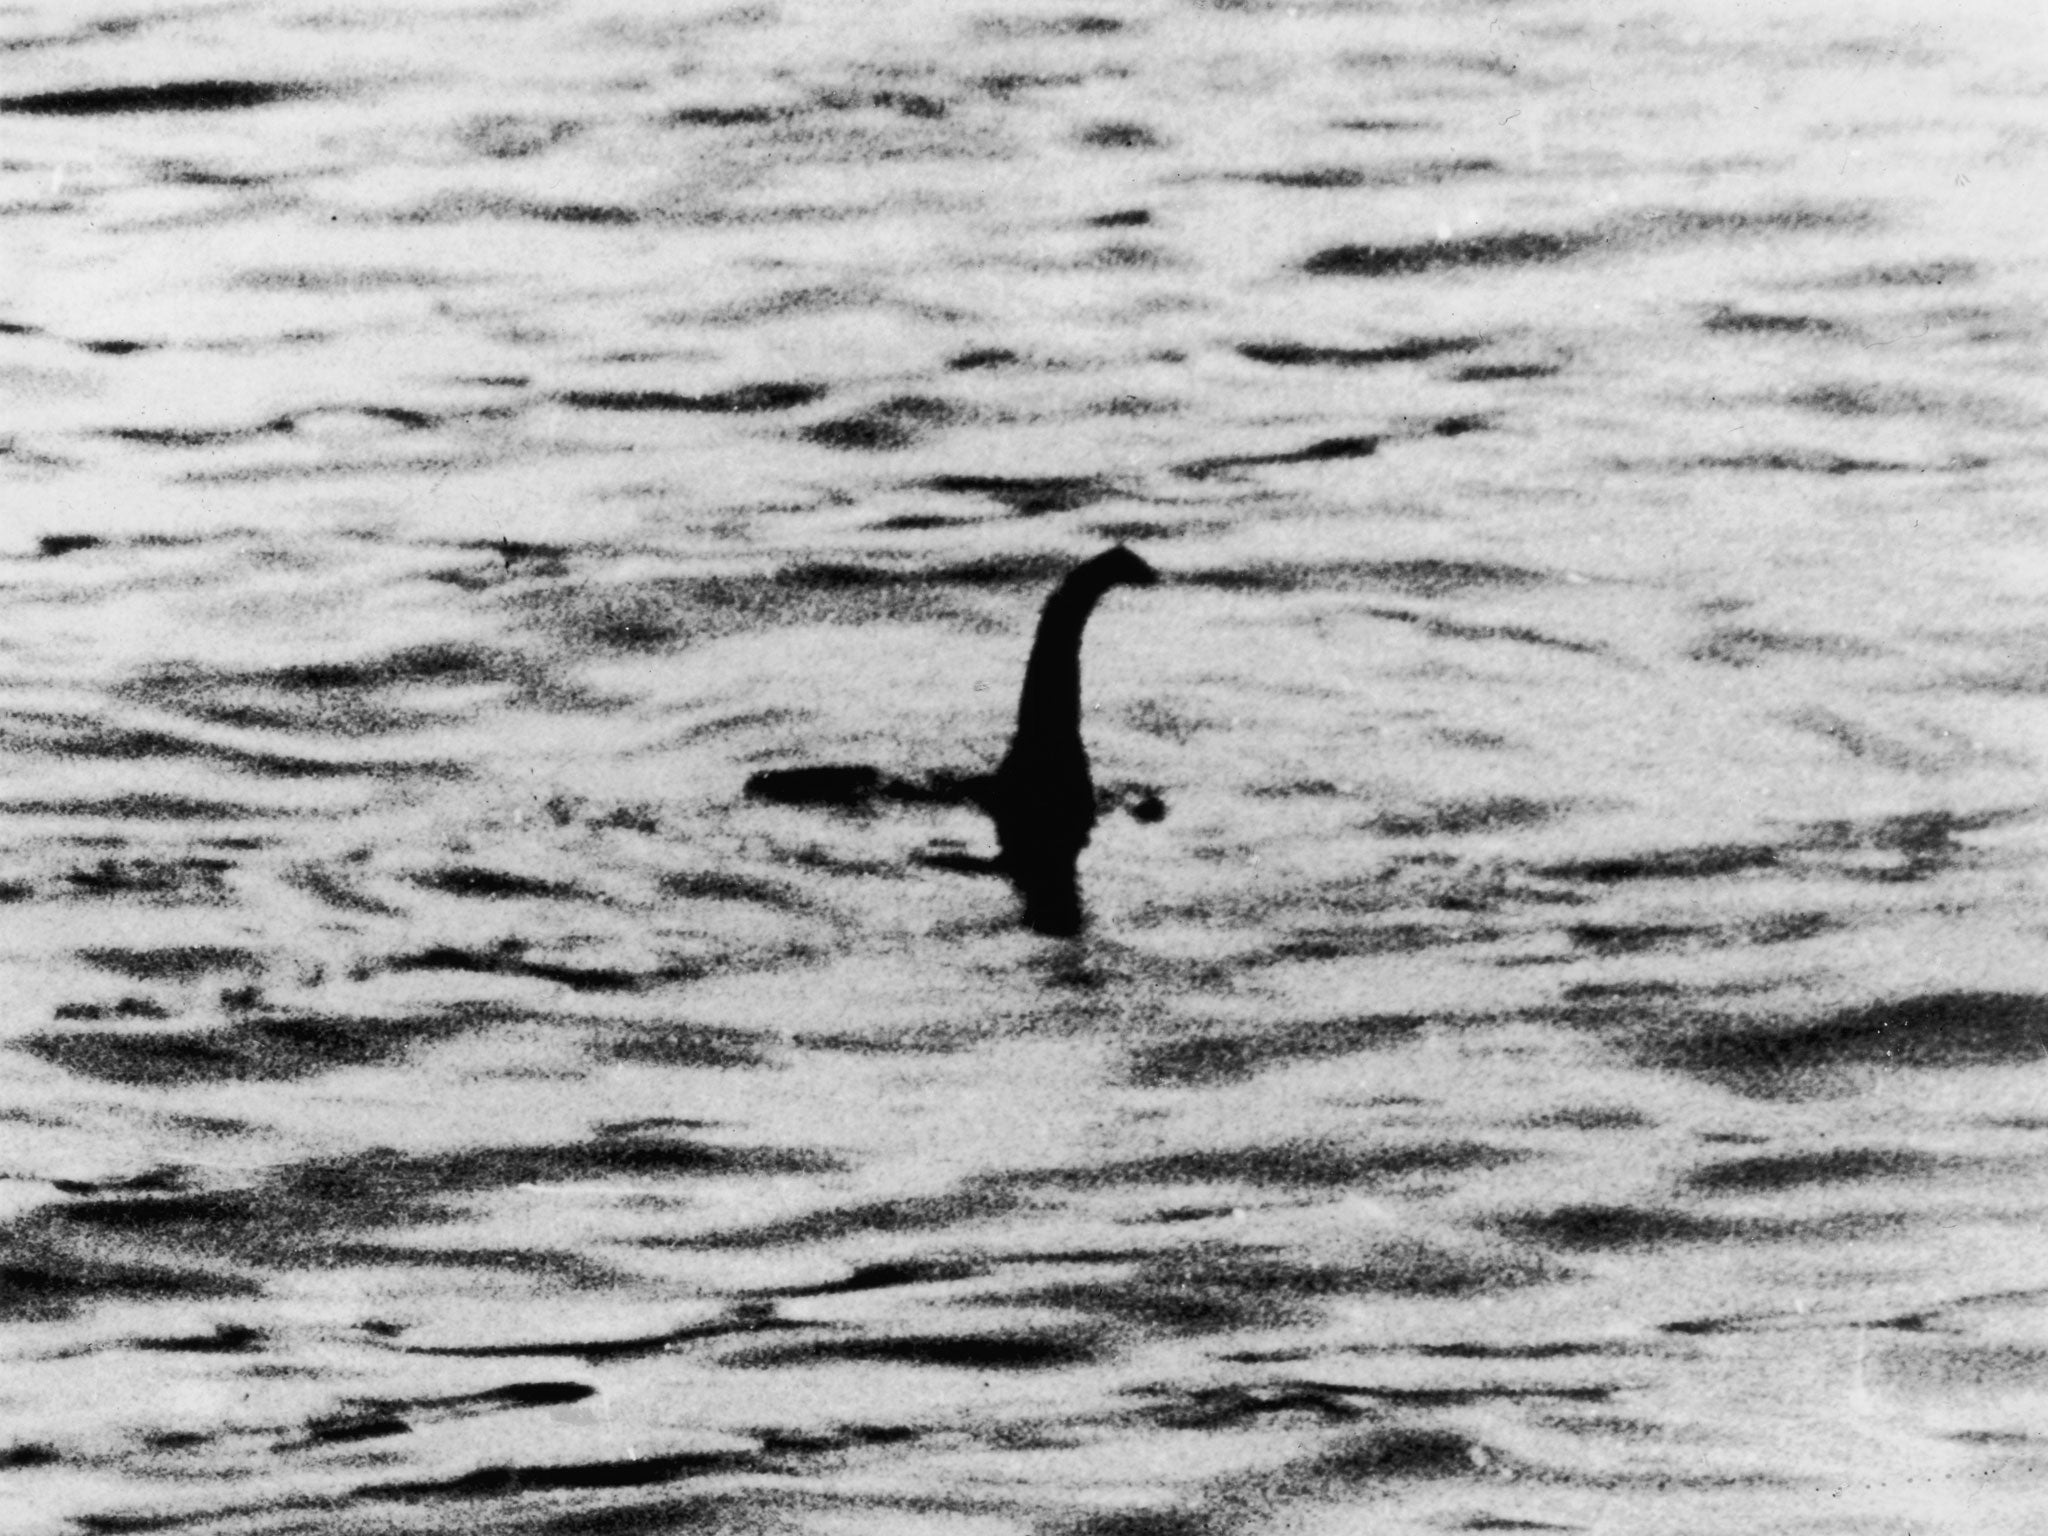 A 1914 ‘photo’ of Nessie, later revealed to be a fake